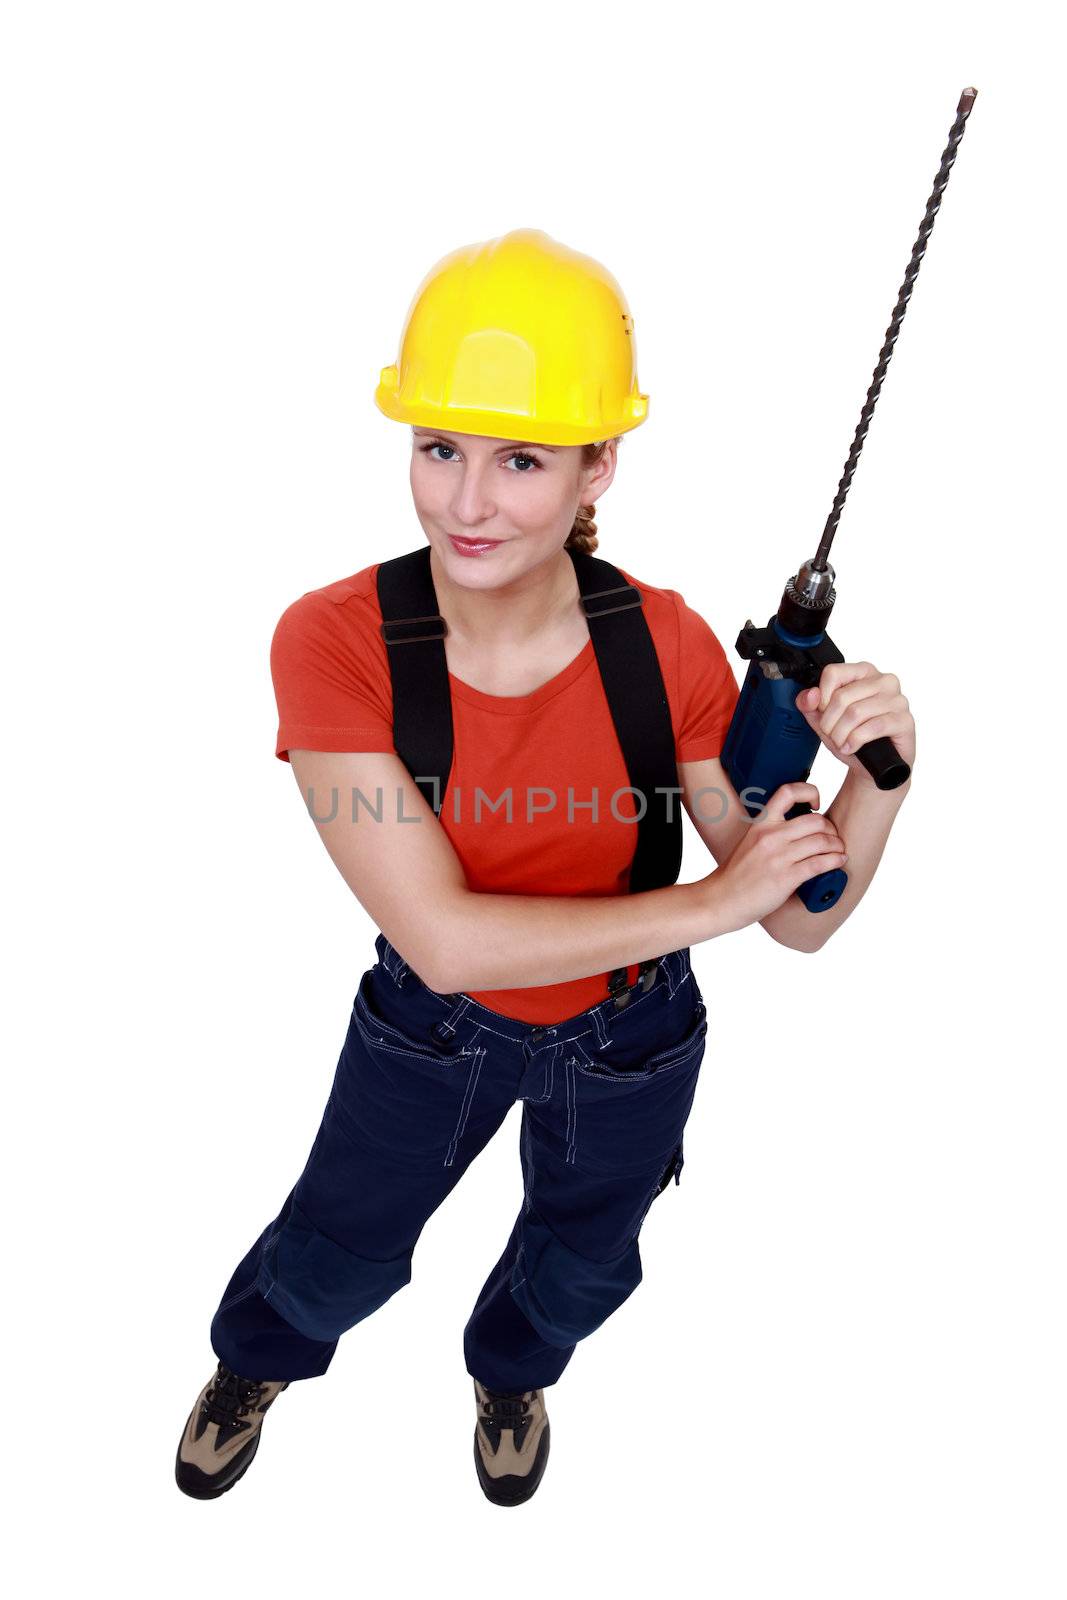 Tradeswoman holding a power tool by phovoir